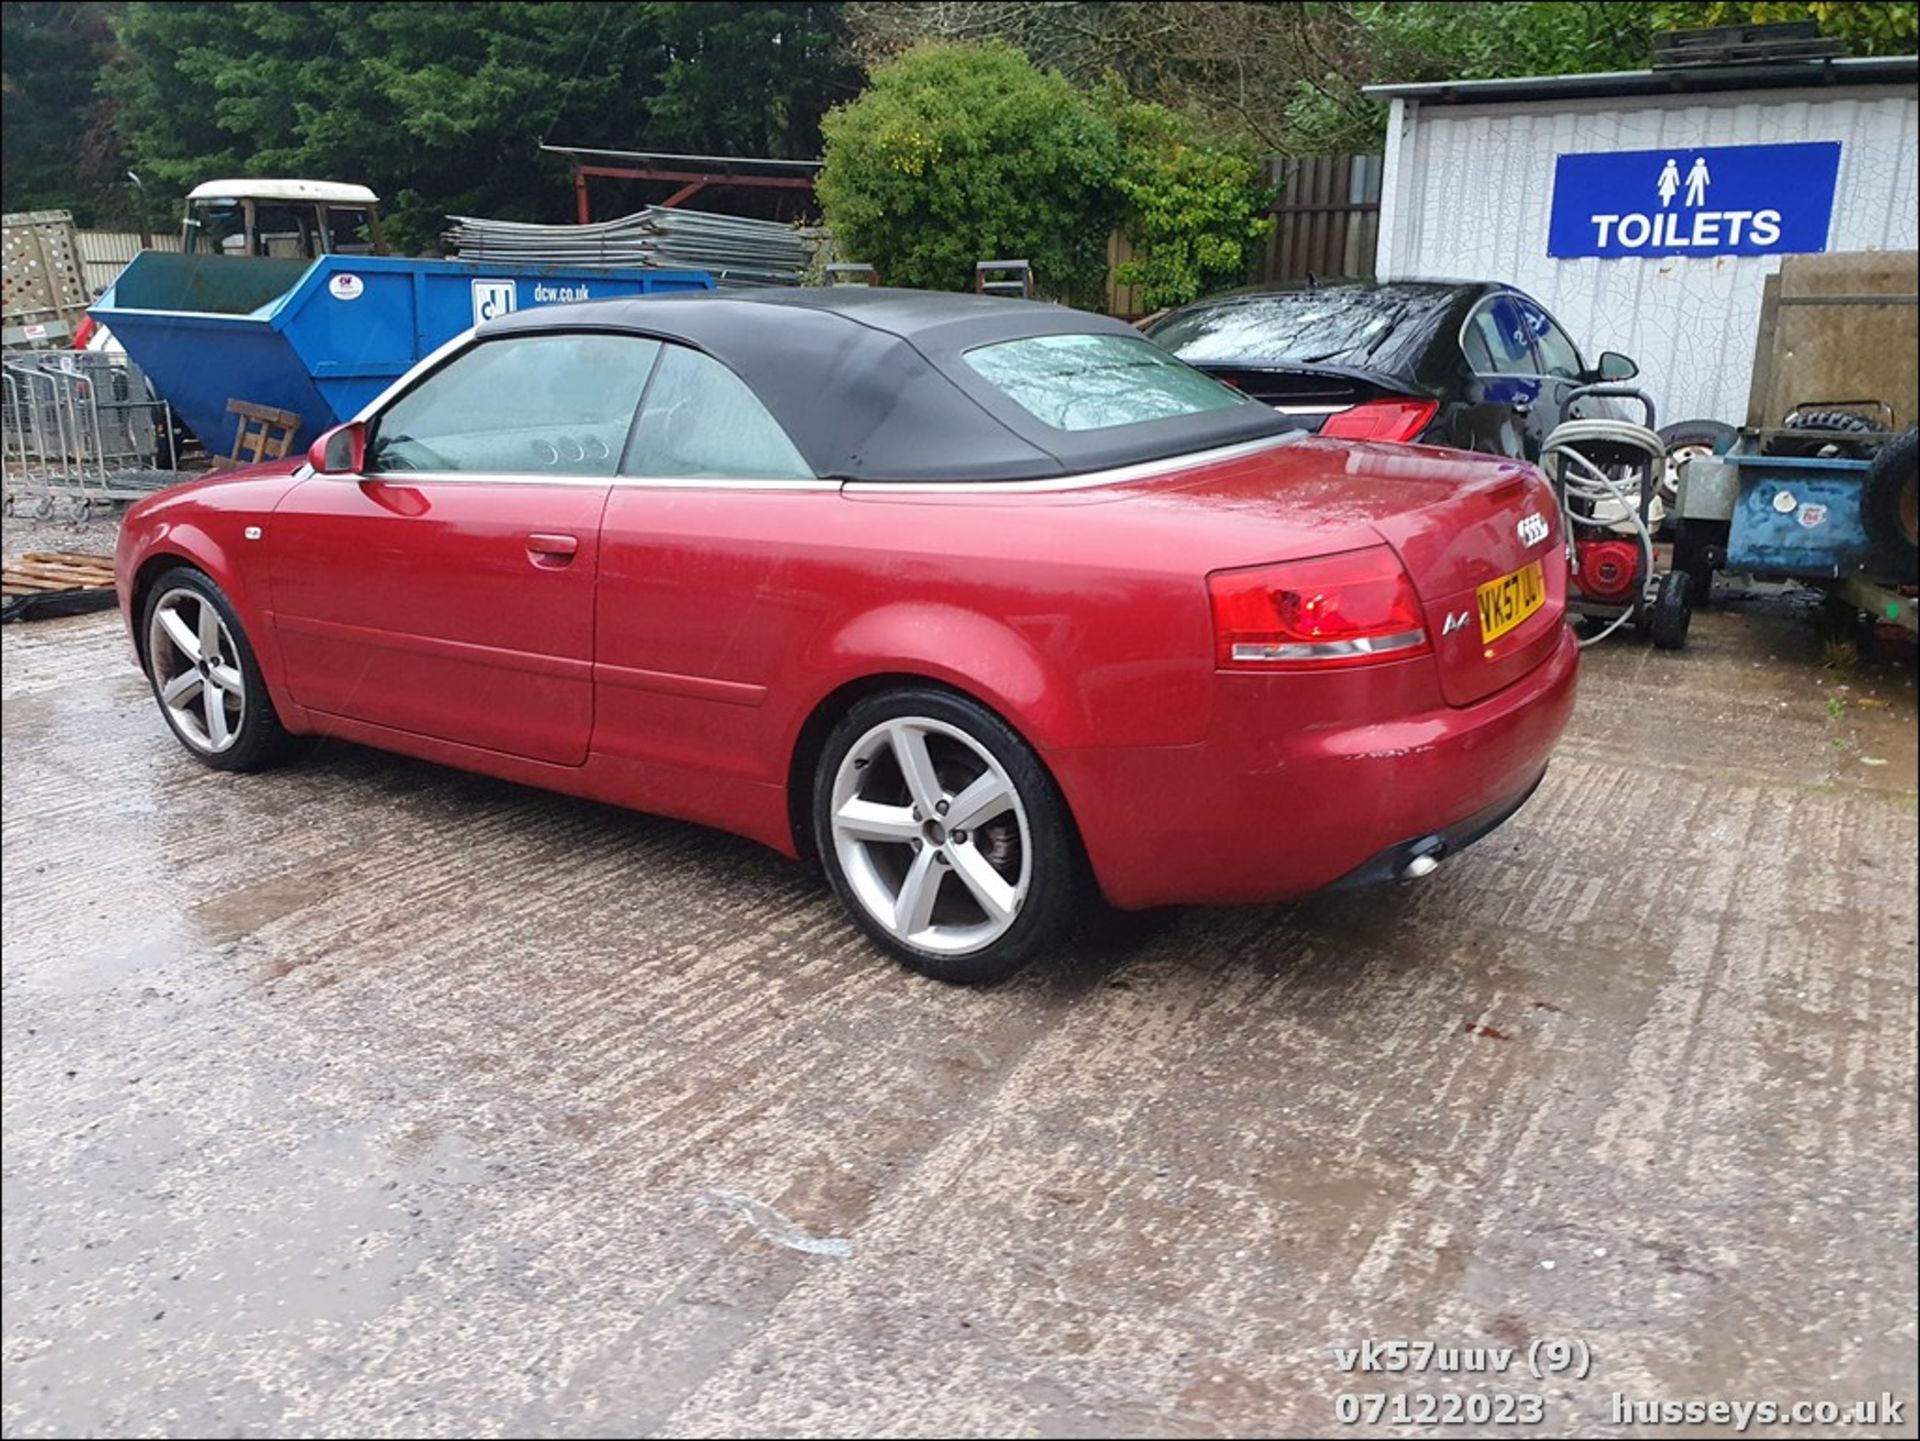 07/57 AUDI A4 SPORT CABRIOLET TDI A - 1986cc 2dr Convertible (Red, 151k) - Image 10 of 25